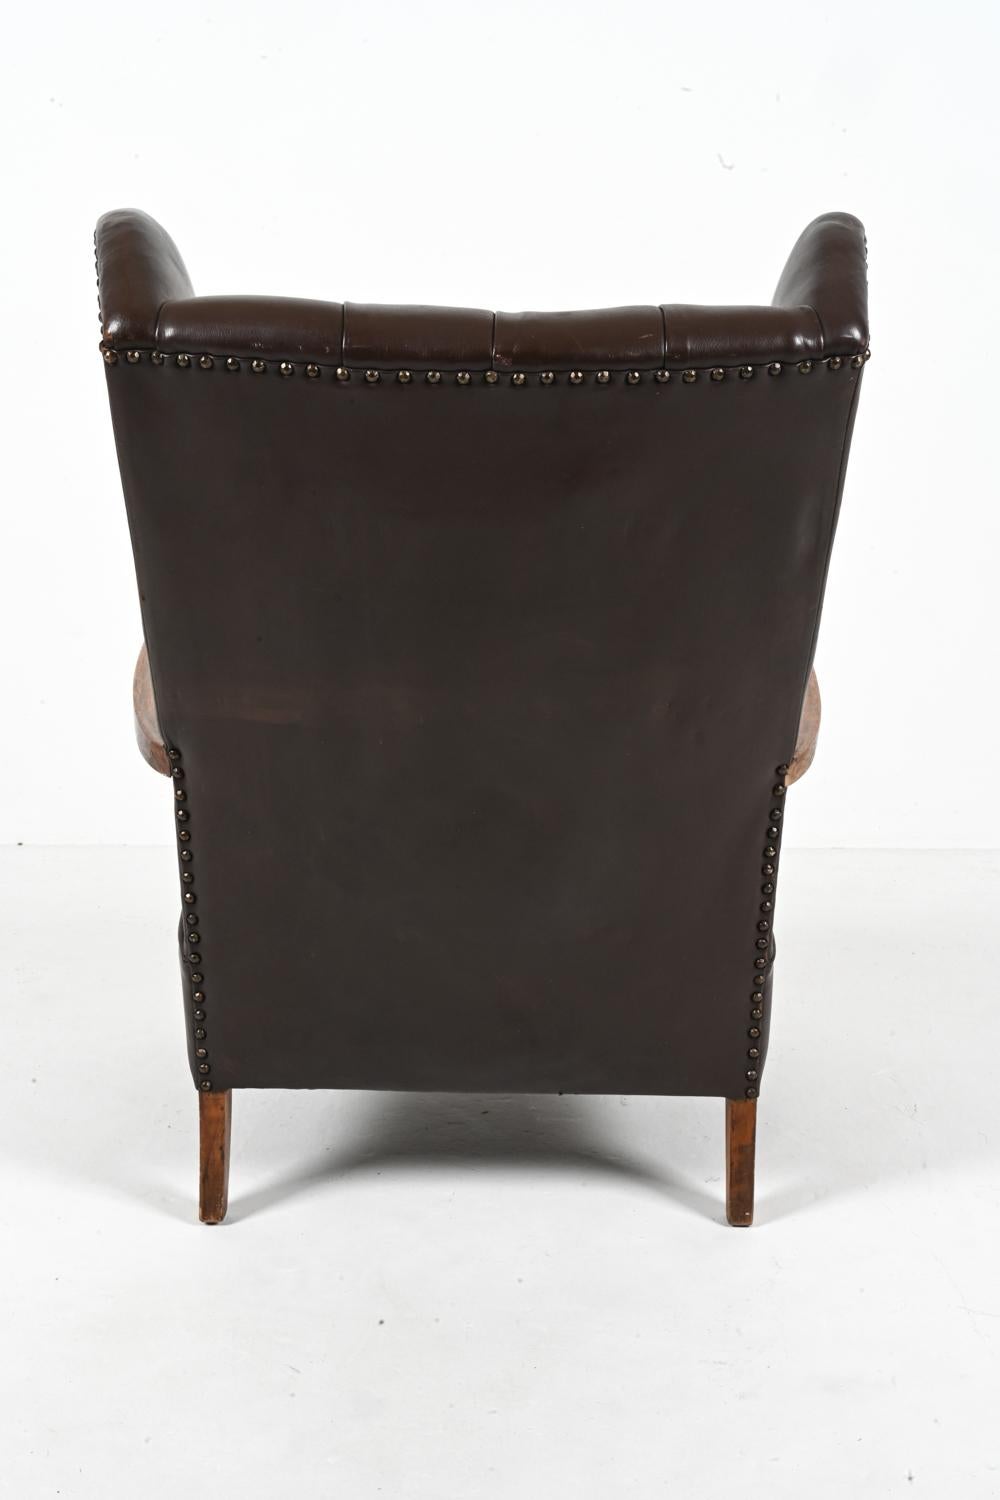 Fritz Hansen Model 1582 Wingback Lounge Chair in Beech & Leather, c. 1940's For Sale 6